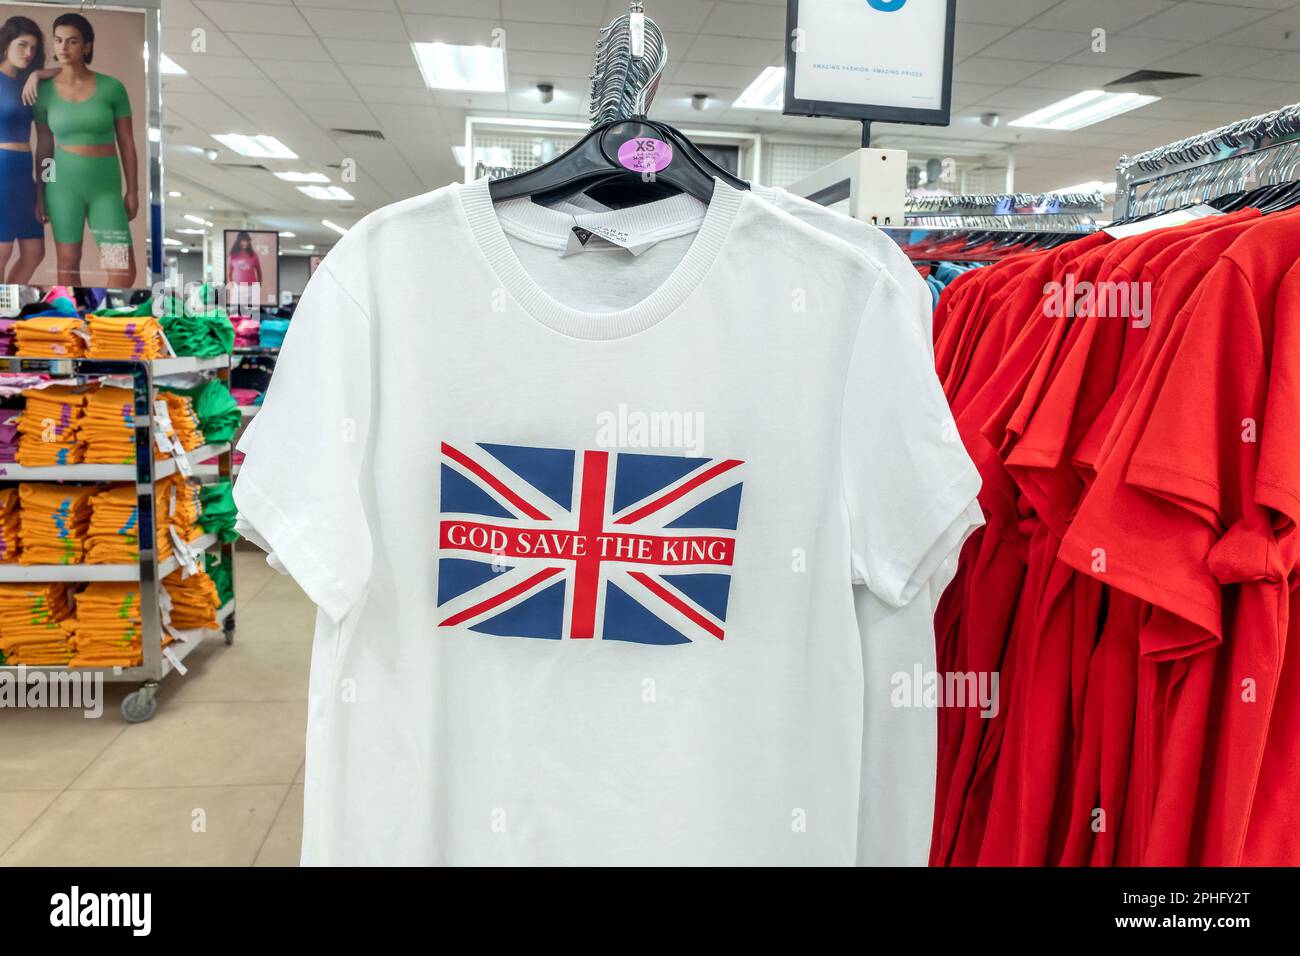 Brighton, March 28th 2023: Patriotic t-shirts on sale at Primark that read 'God Save The King' Stock Photo